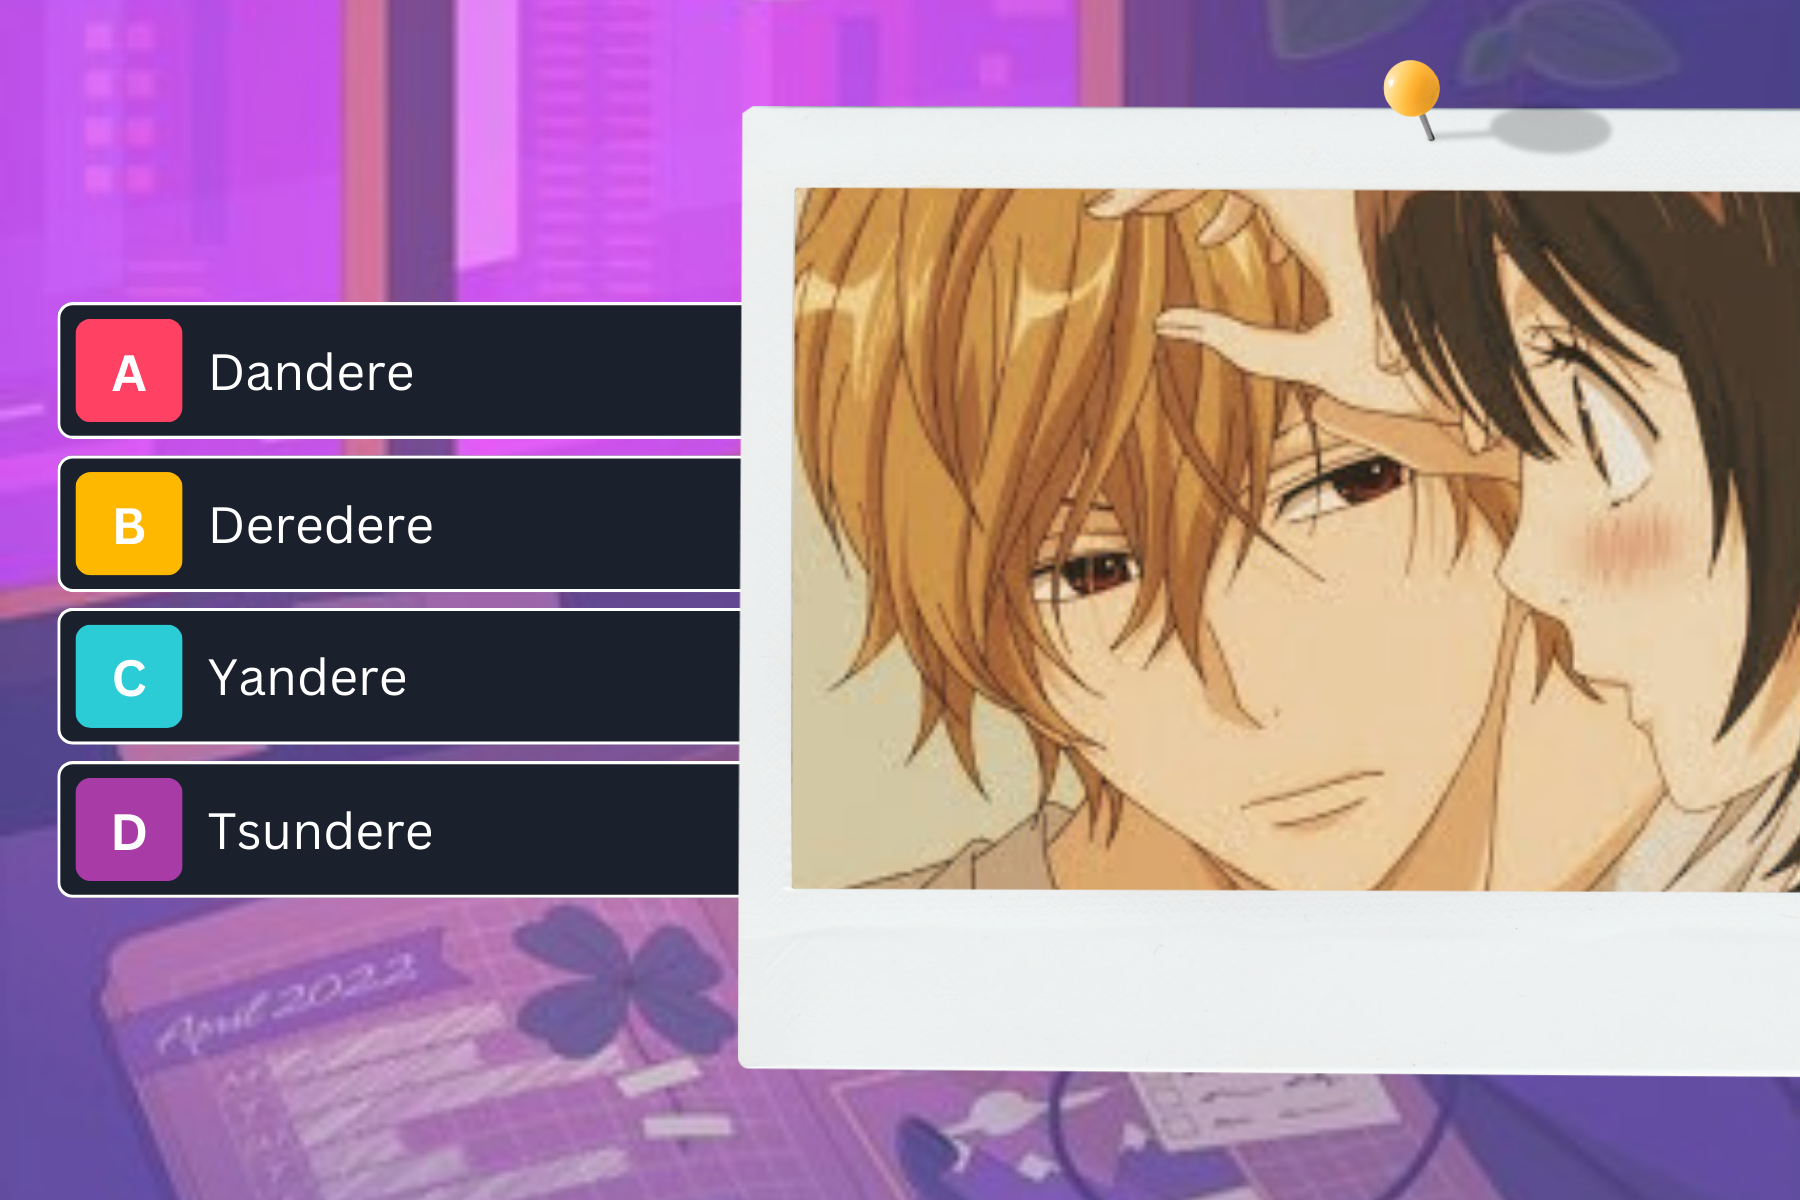 Anime Quiz: Do You Know Your "Dere's" (Anime Archetypes)?